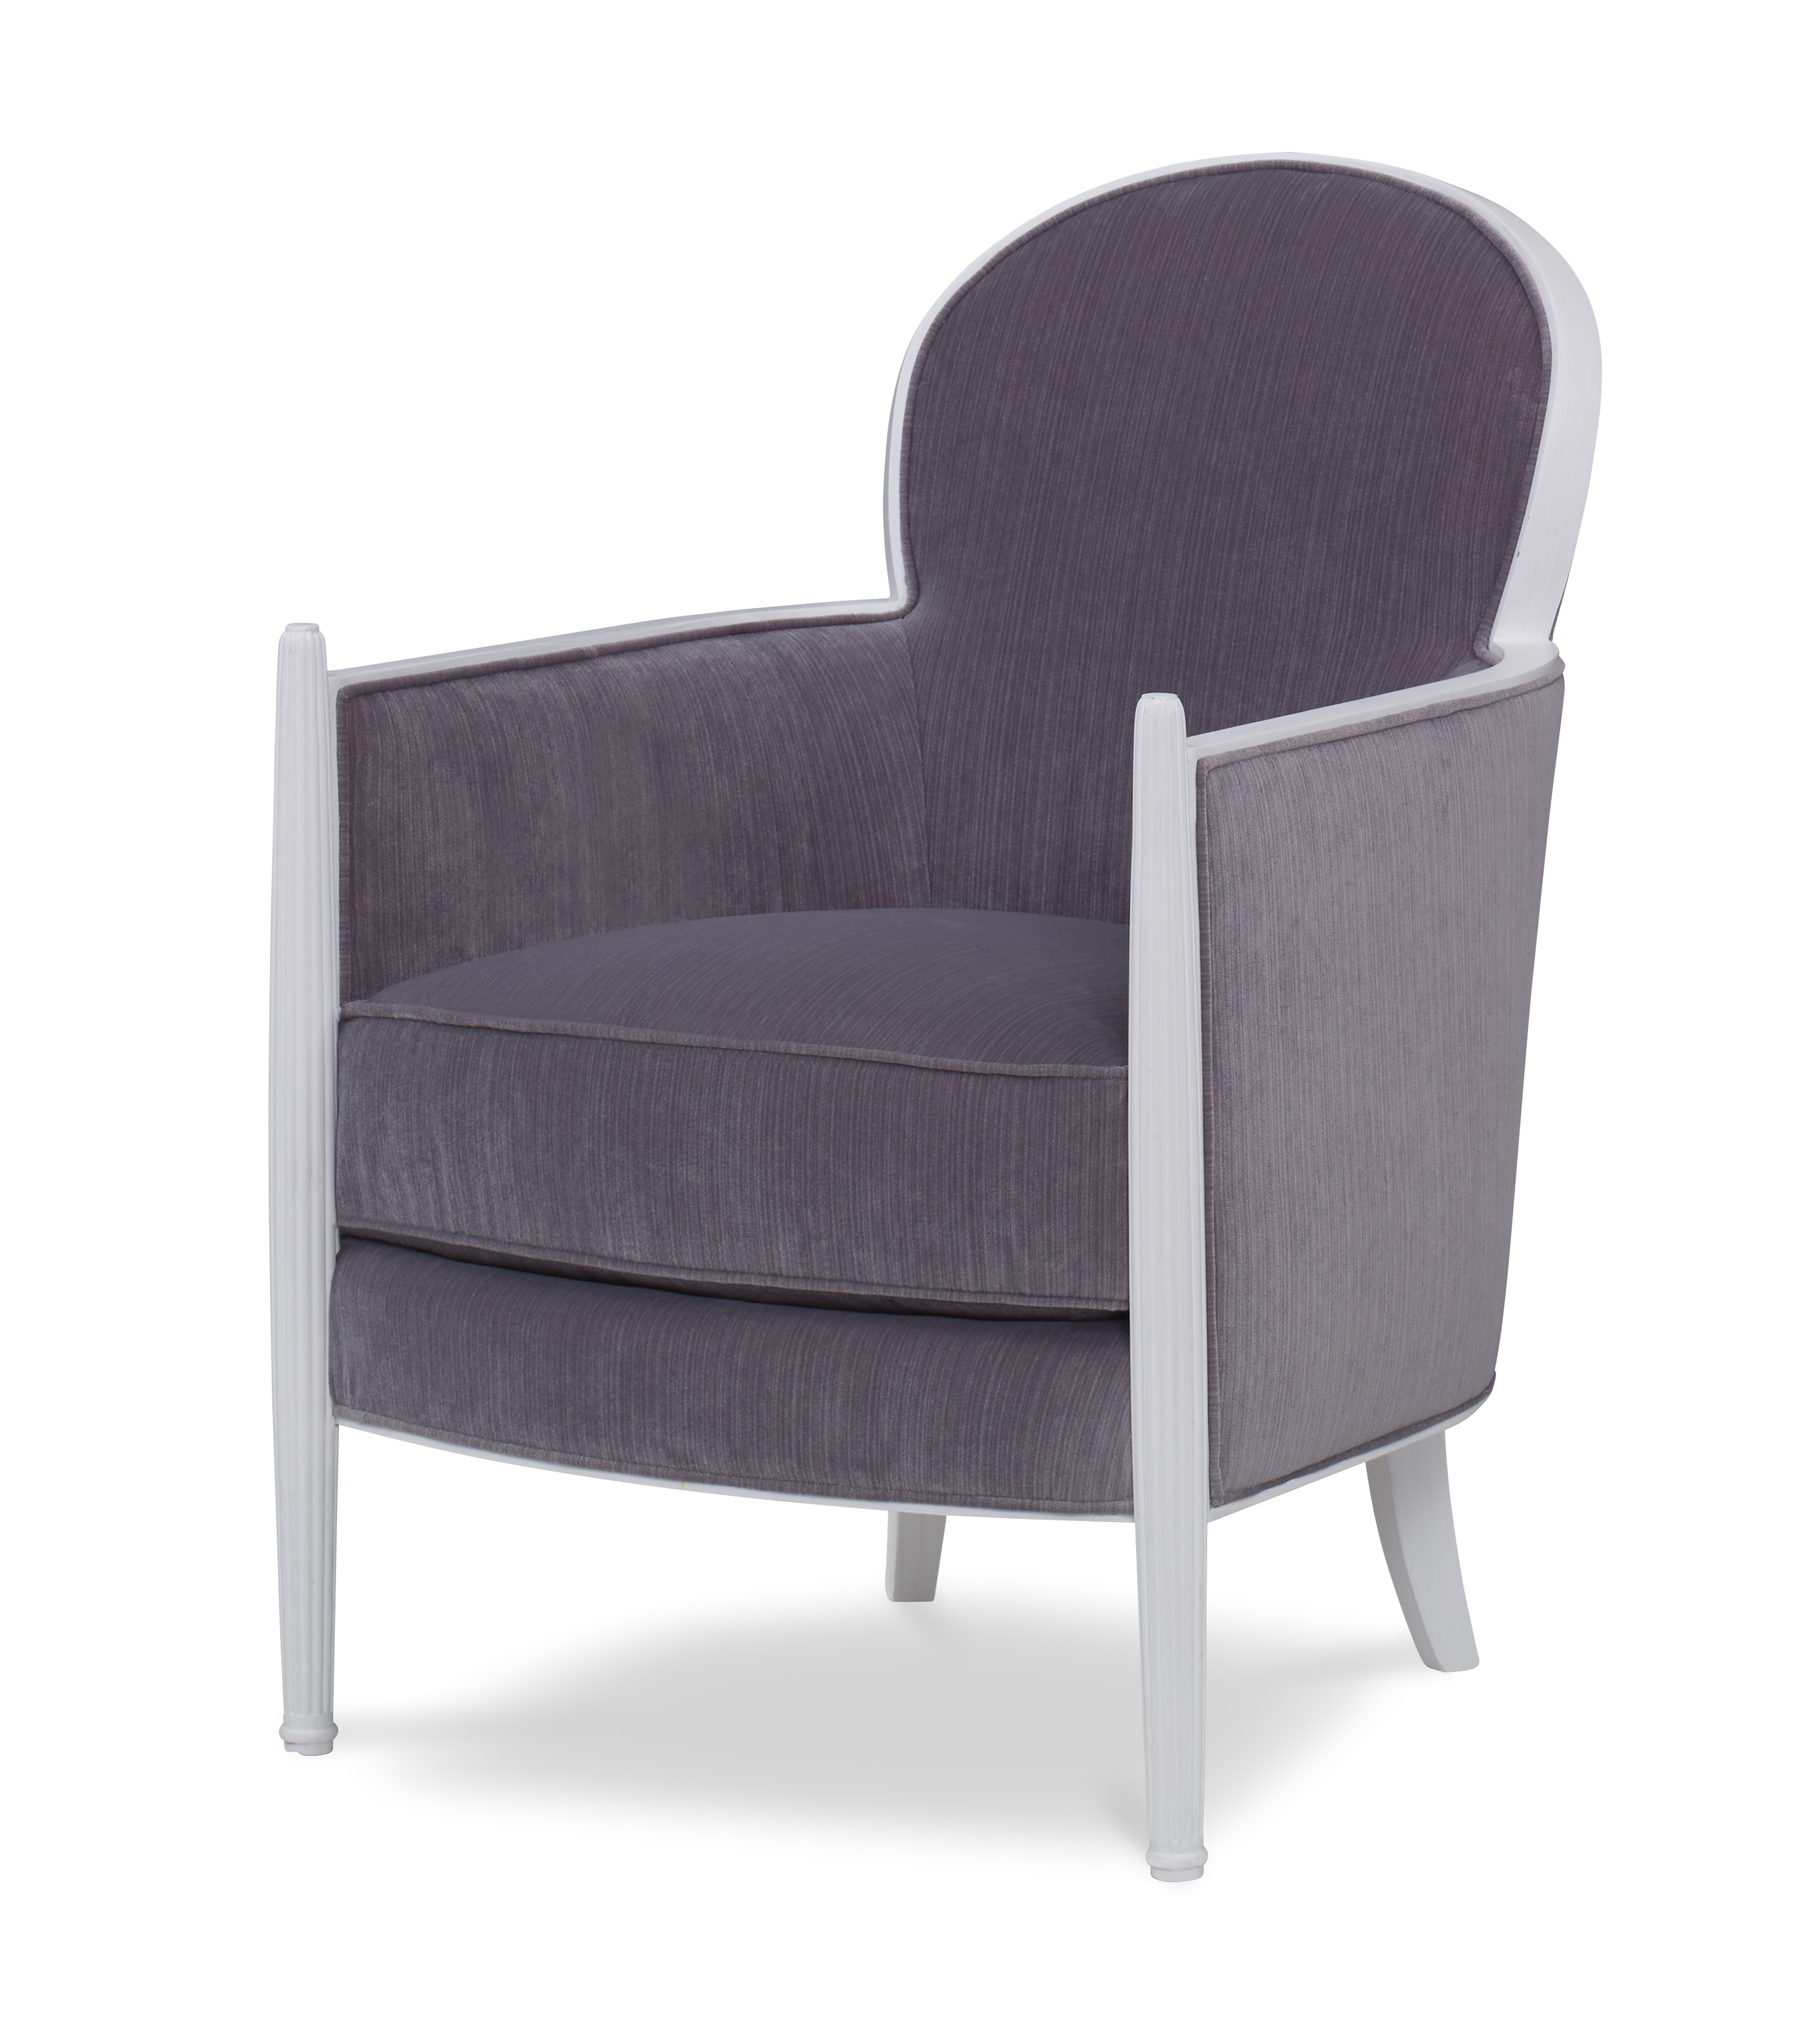 Solstice chair in lavender and white designed by Windsor Smith for Century Furniture